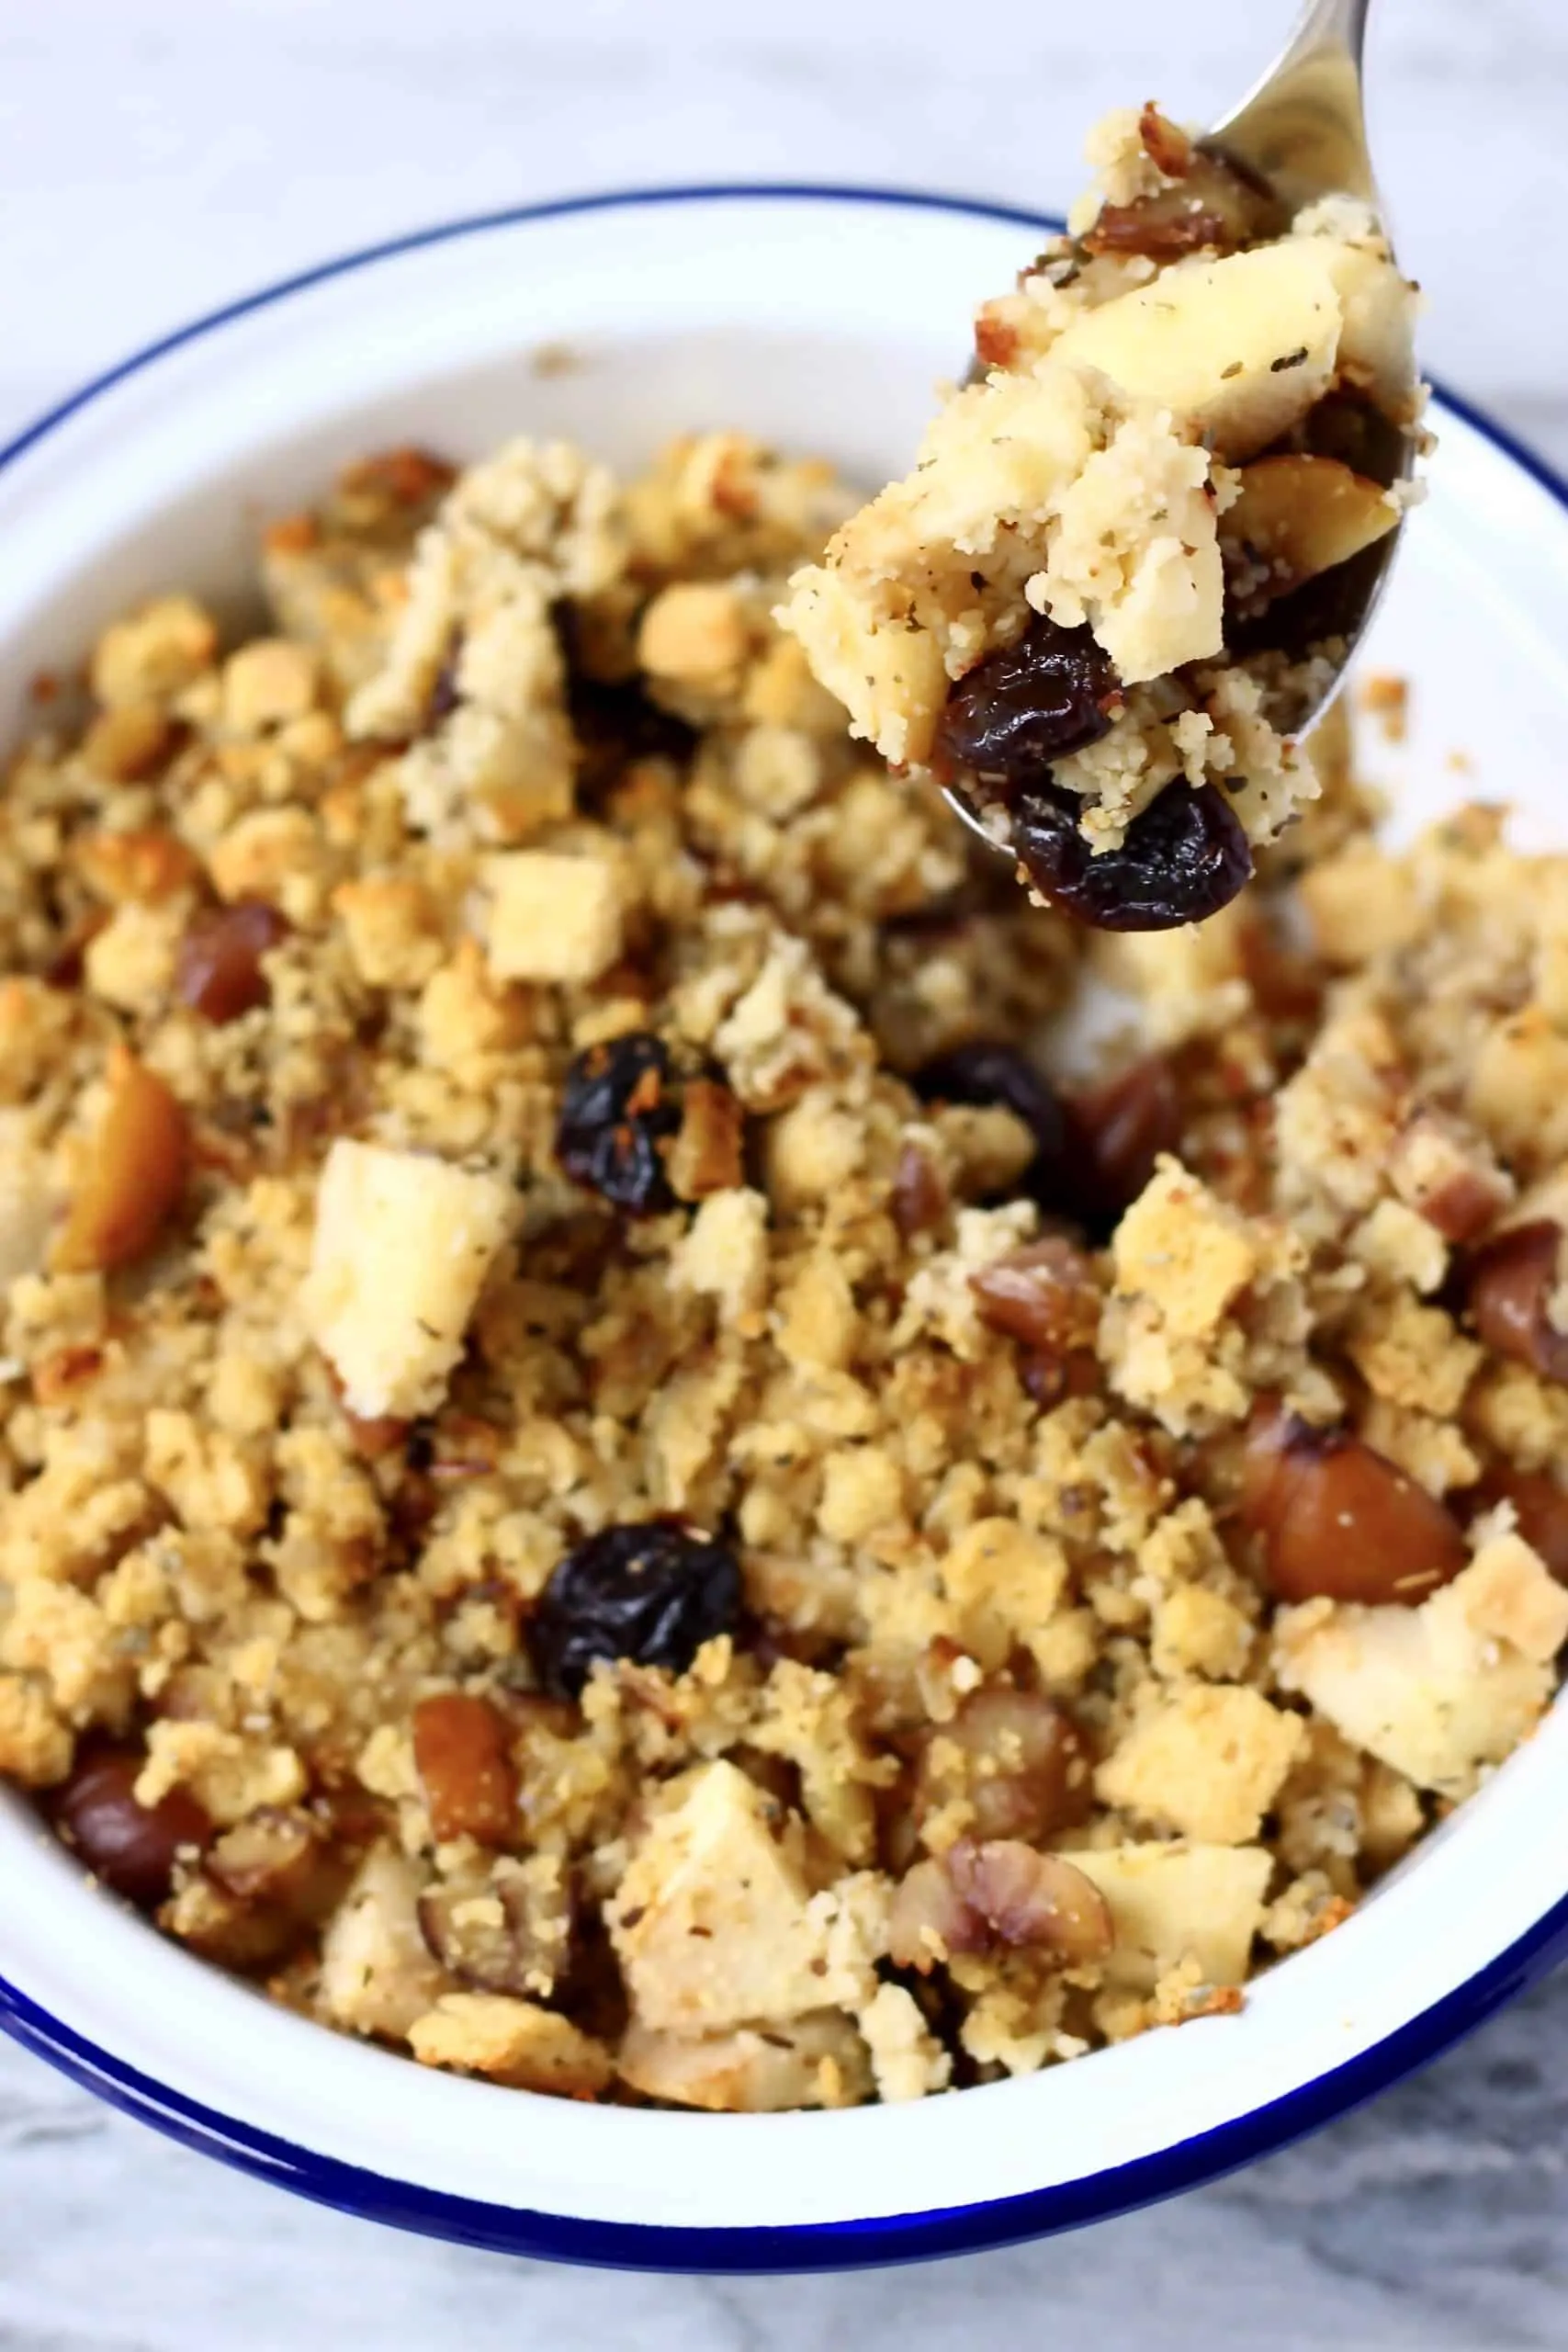 Stuffing with chestnuts, apple pieces and dried cherries in a white pie dish with a blue rim with a silver spoon holding up a mouthful of stuffing